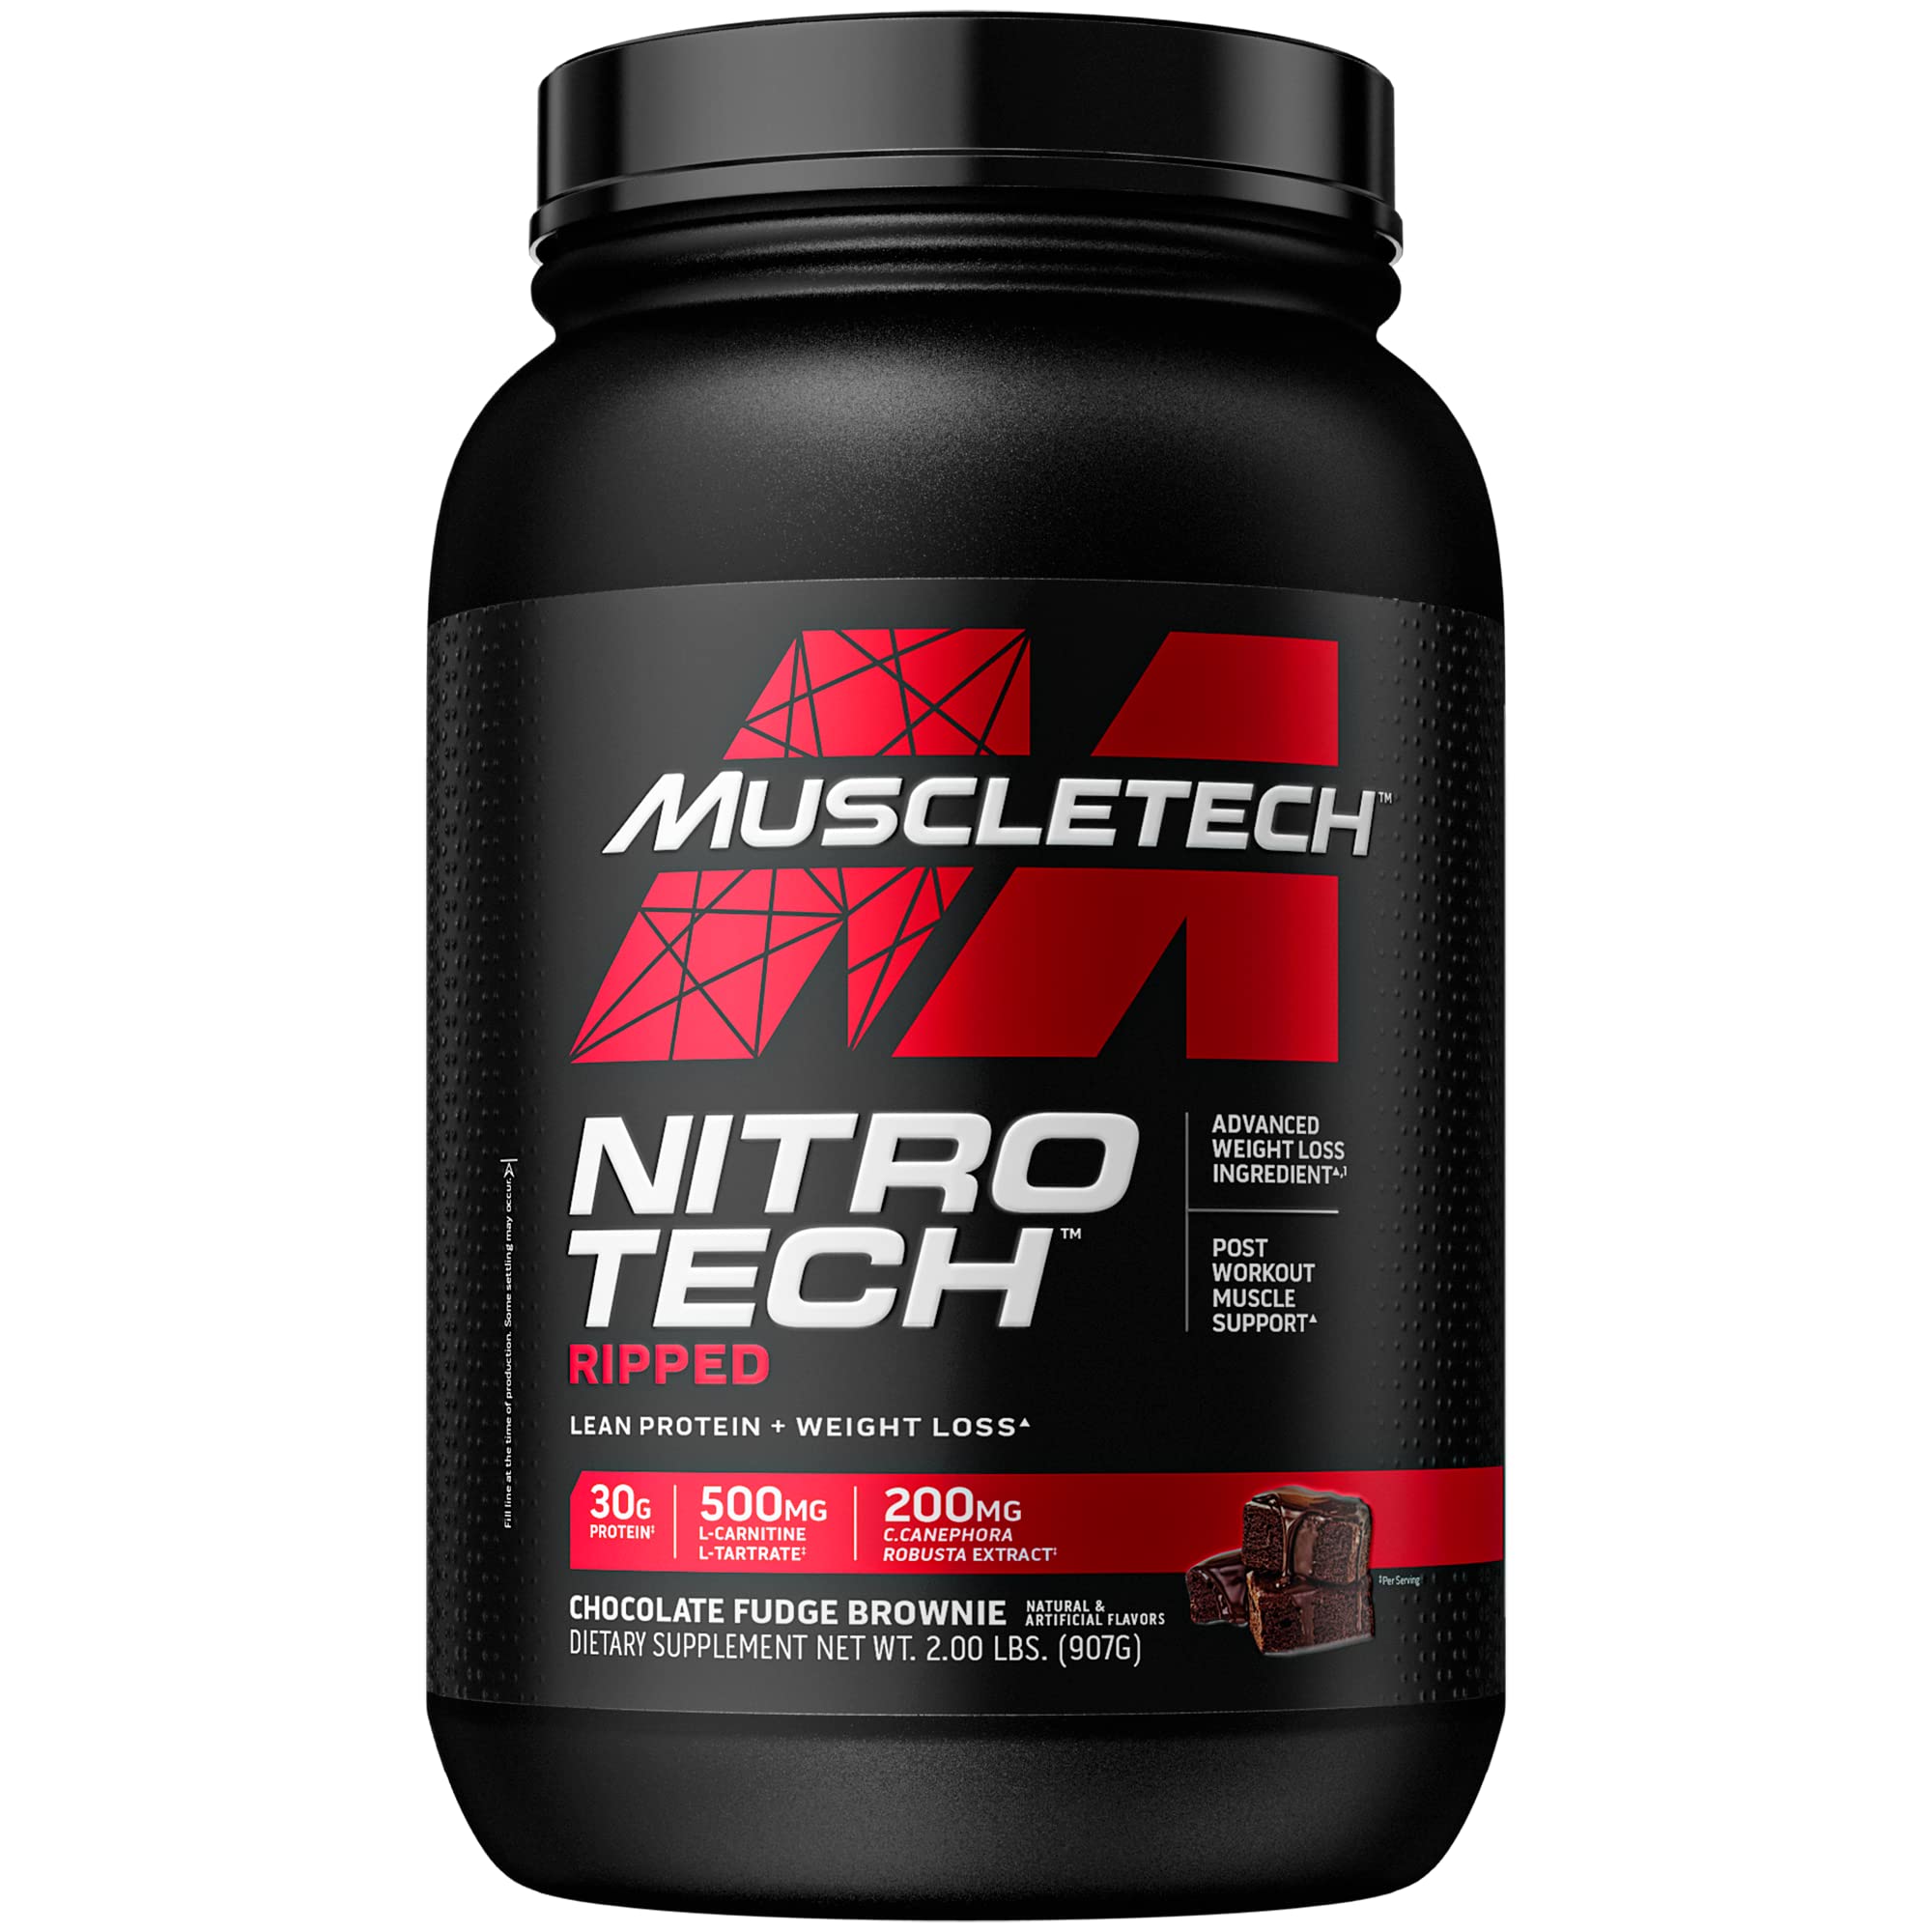 Protein Powder for Weight Loss |MuscleTech Nitro-Tech Ripped |Whey Protein Powder + Weight Loss Formula |Lose Weight |Weight Loss Protein Powder for Women & Men |Chocolate, 2 lb(package may vary)